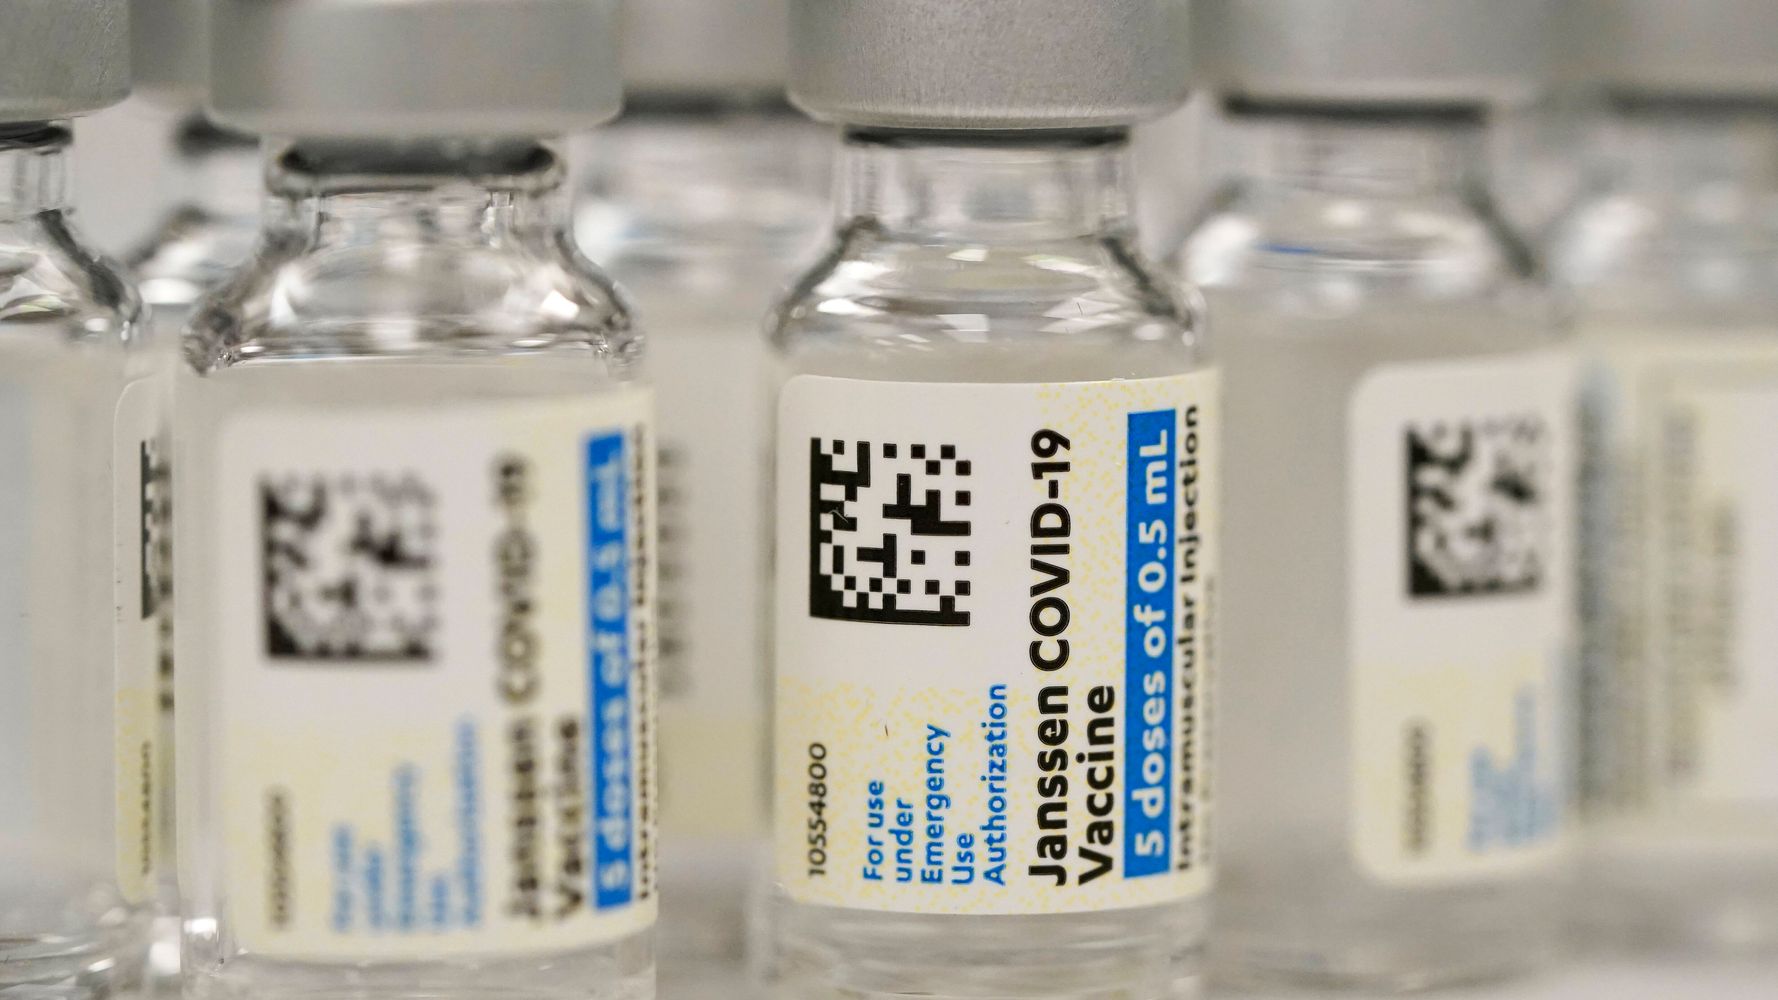 Johnson & Johnson Seeks U.S. Clearance For COVID-19 Vaccine Booster Doses